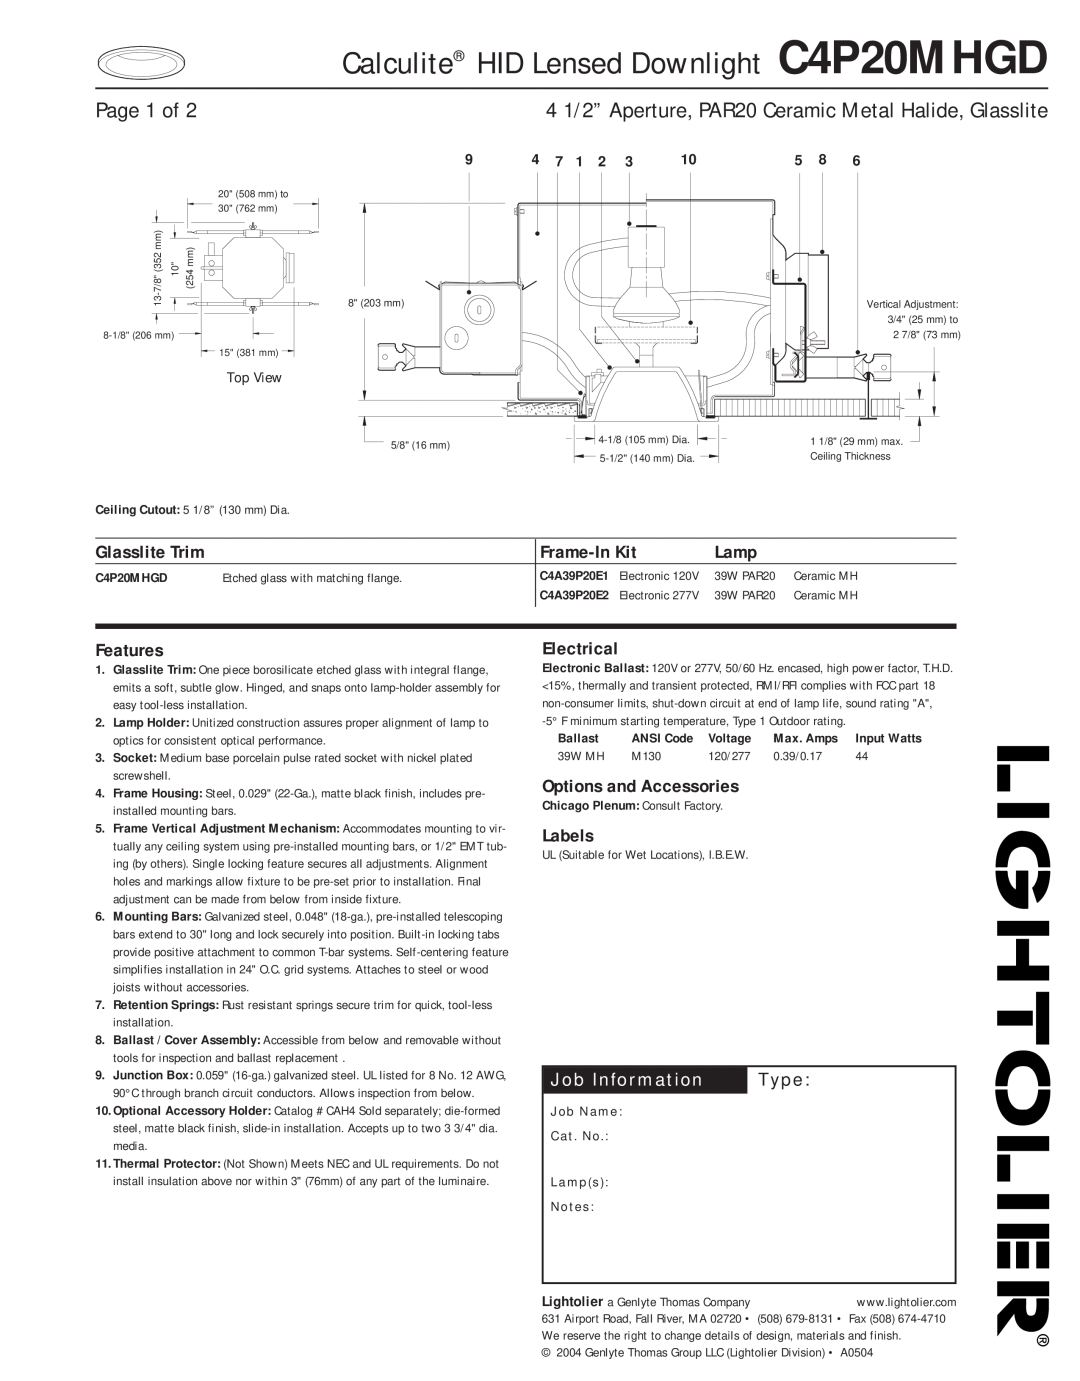 Lightolier manual Calculite HID Lensed Downlight C4P20MHGD, Page 1 of, Job Information, Type, Frame-In Kit, Lamp 